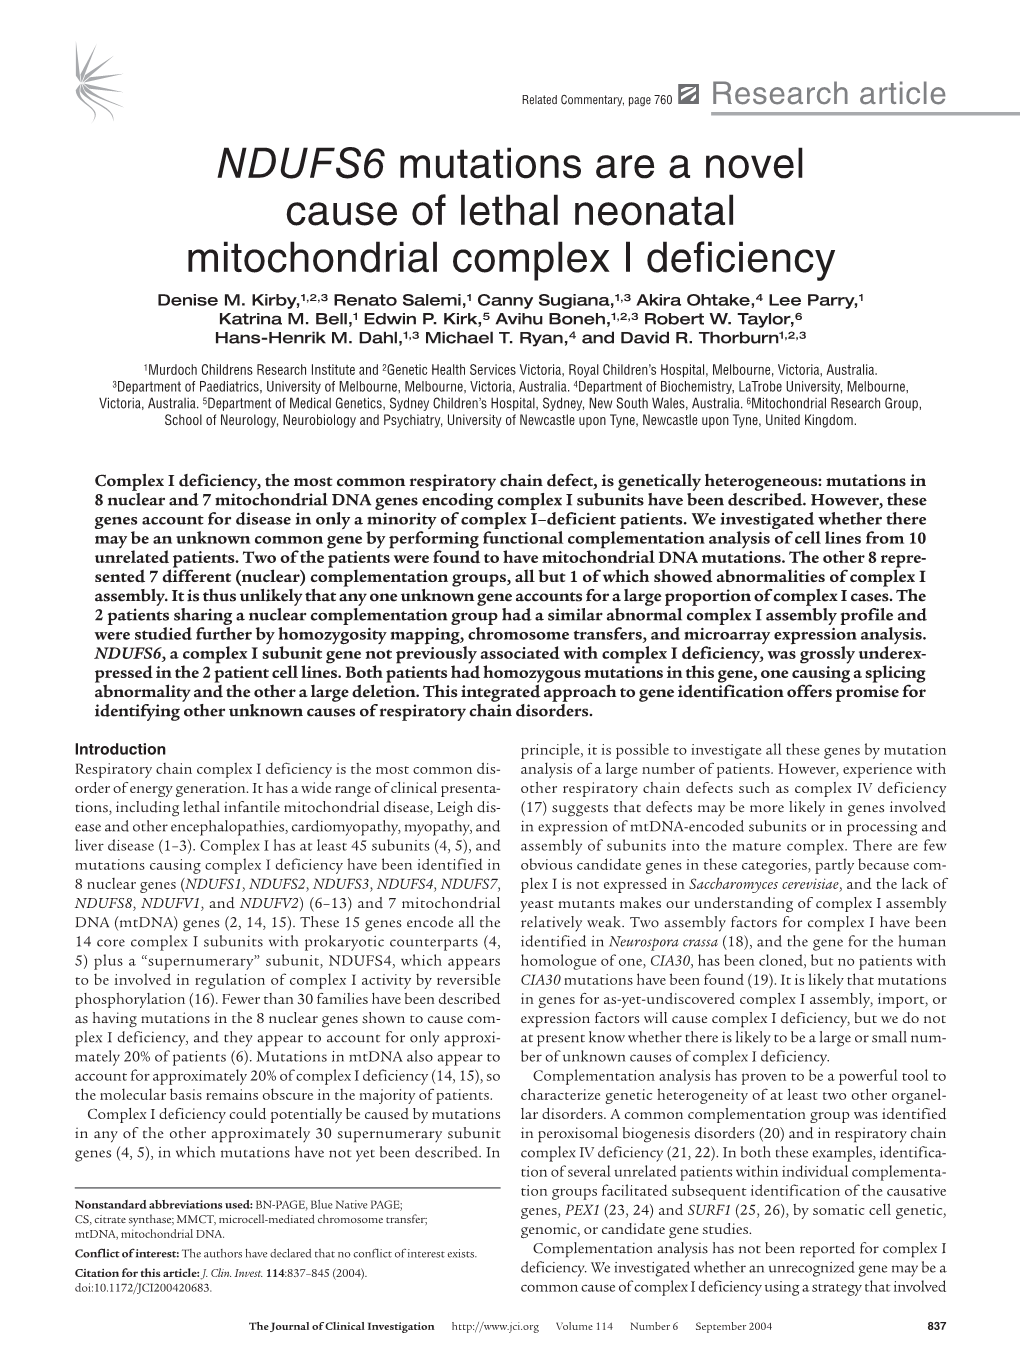 NDUFS6 Mutations Are a Novel Cause of Lethal Neonatal Mitochondrial Complex I Deficiency Denise M